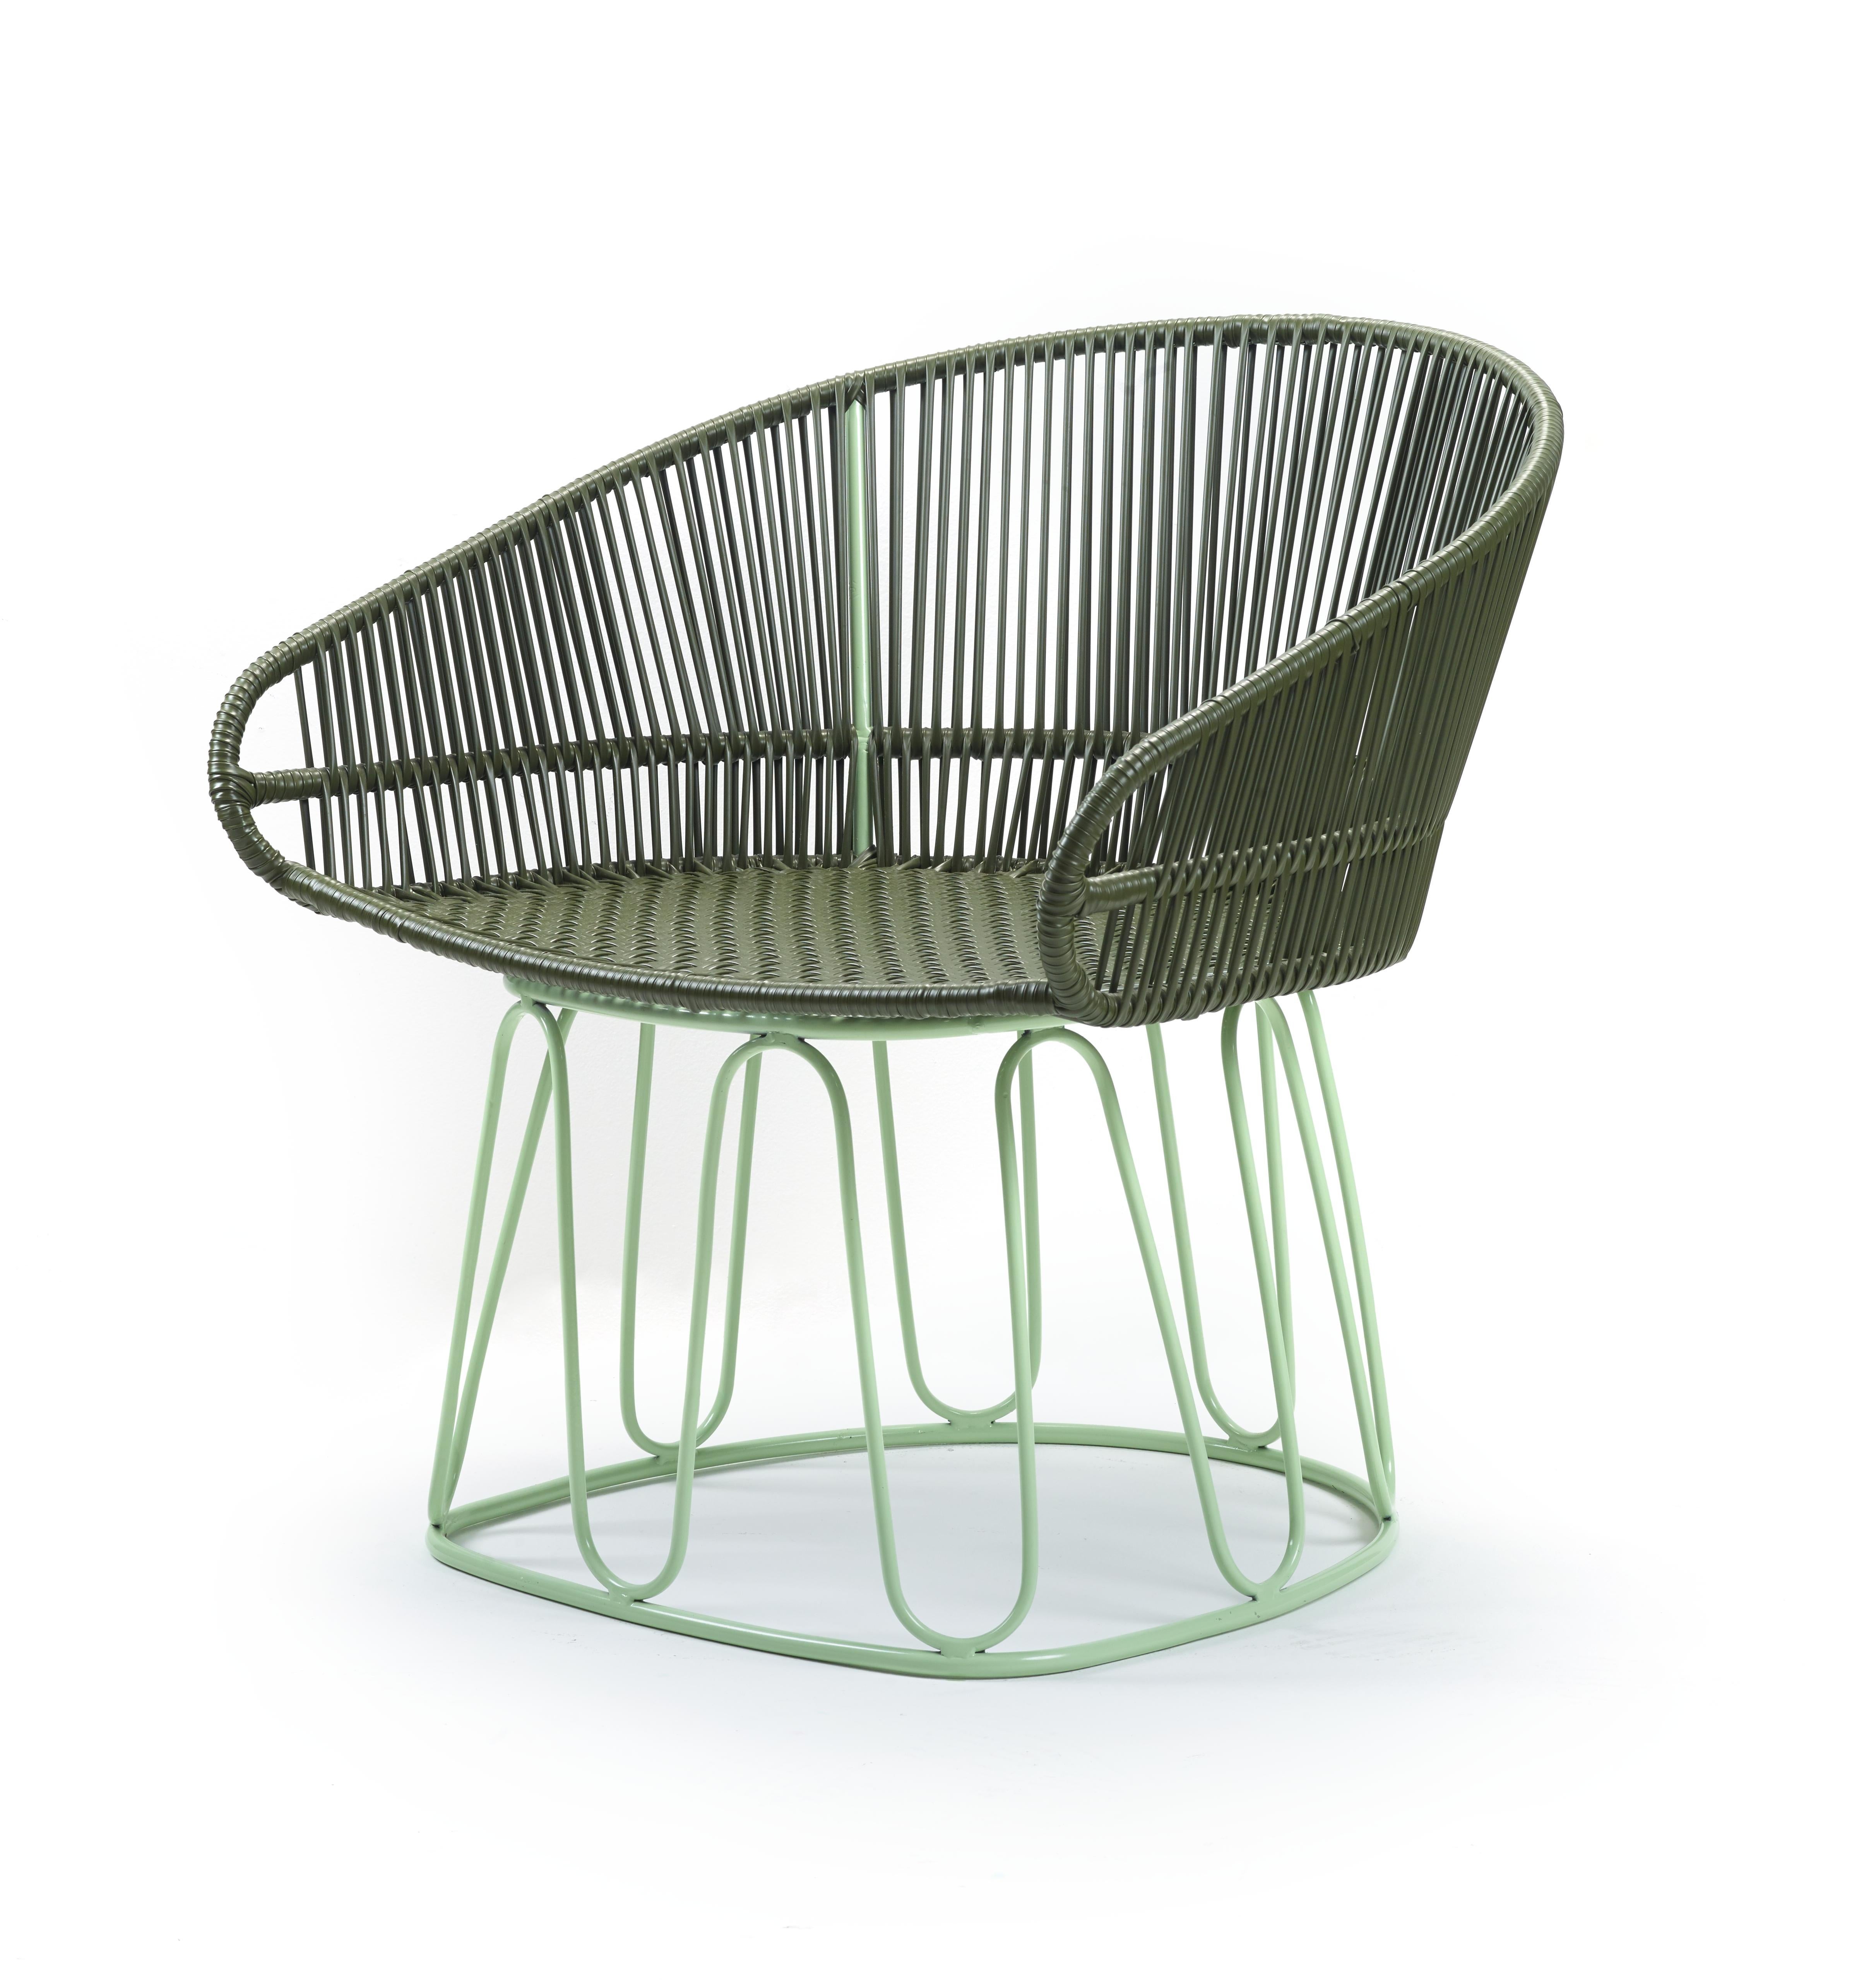 Set of 2 olive circo lounge chair by Sebastian Herkner
Materials: Galvanized and powder-coated tubular steel. PVC strings.
Technique: Made from recycled plastic. Weaved by local craftspeople in Colombia. 
Dimensions: W 74 x D 66.2 x H 73 cm